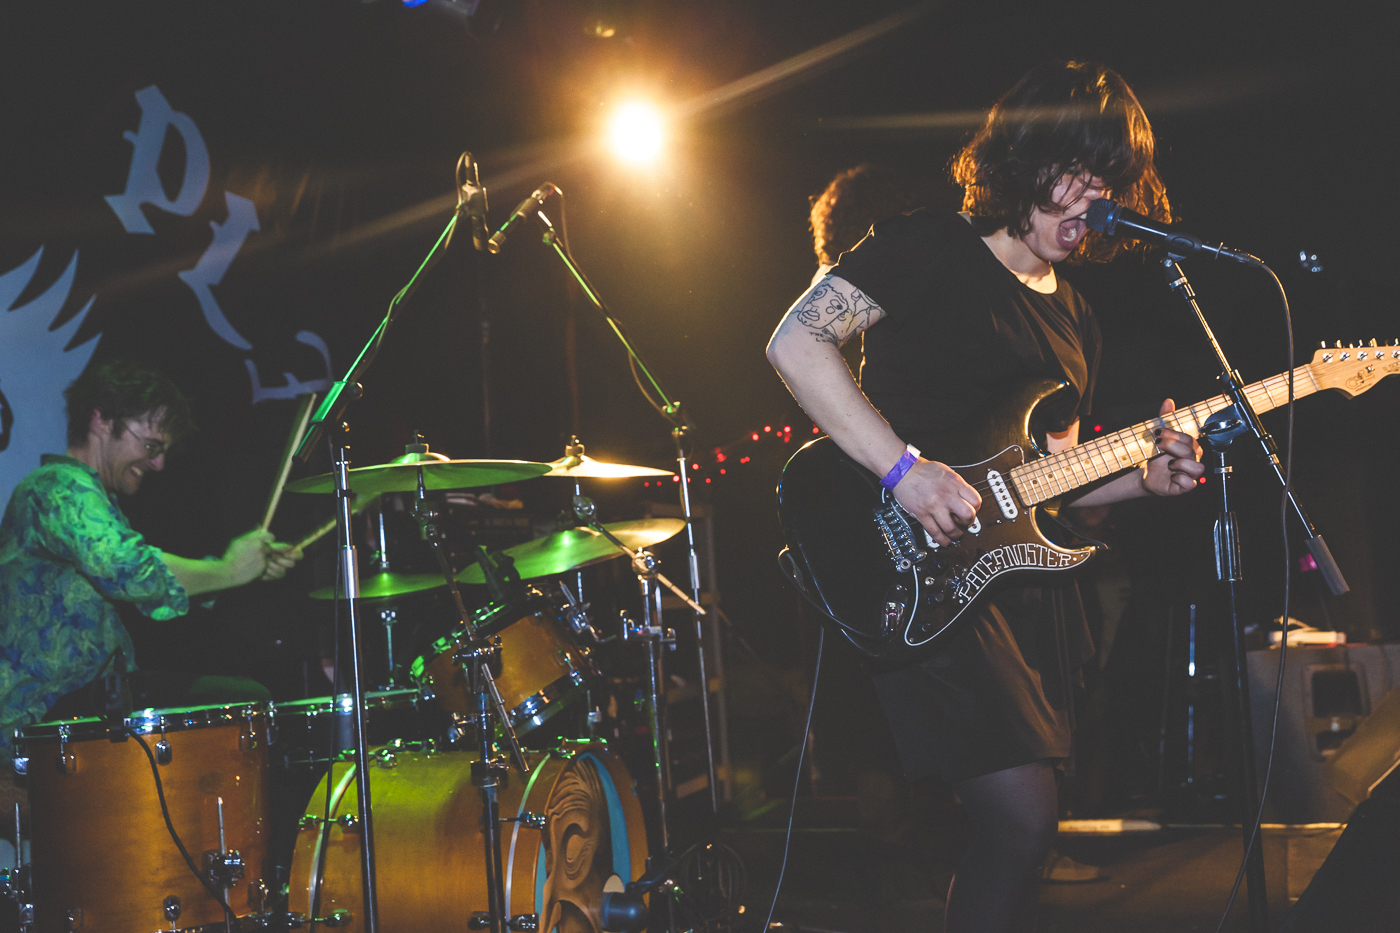 Screaming Females at Mohawk Place (4/30/17)